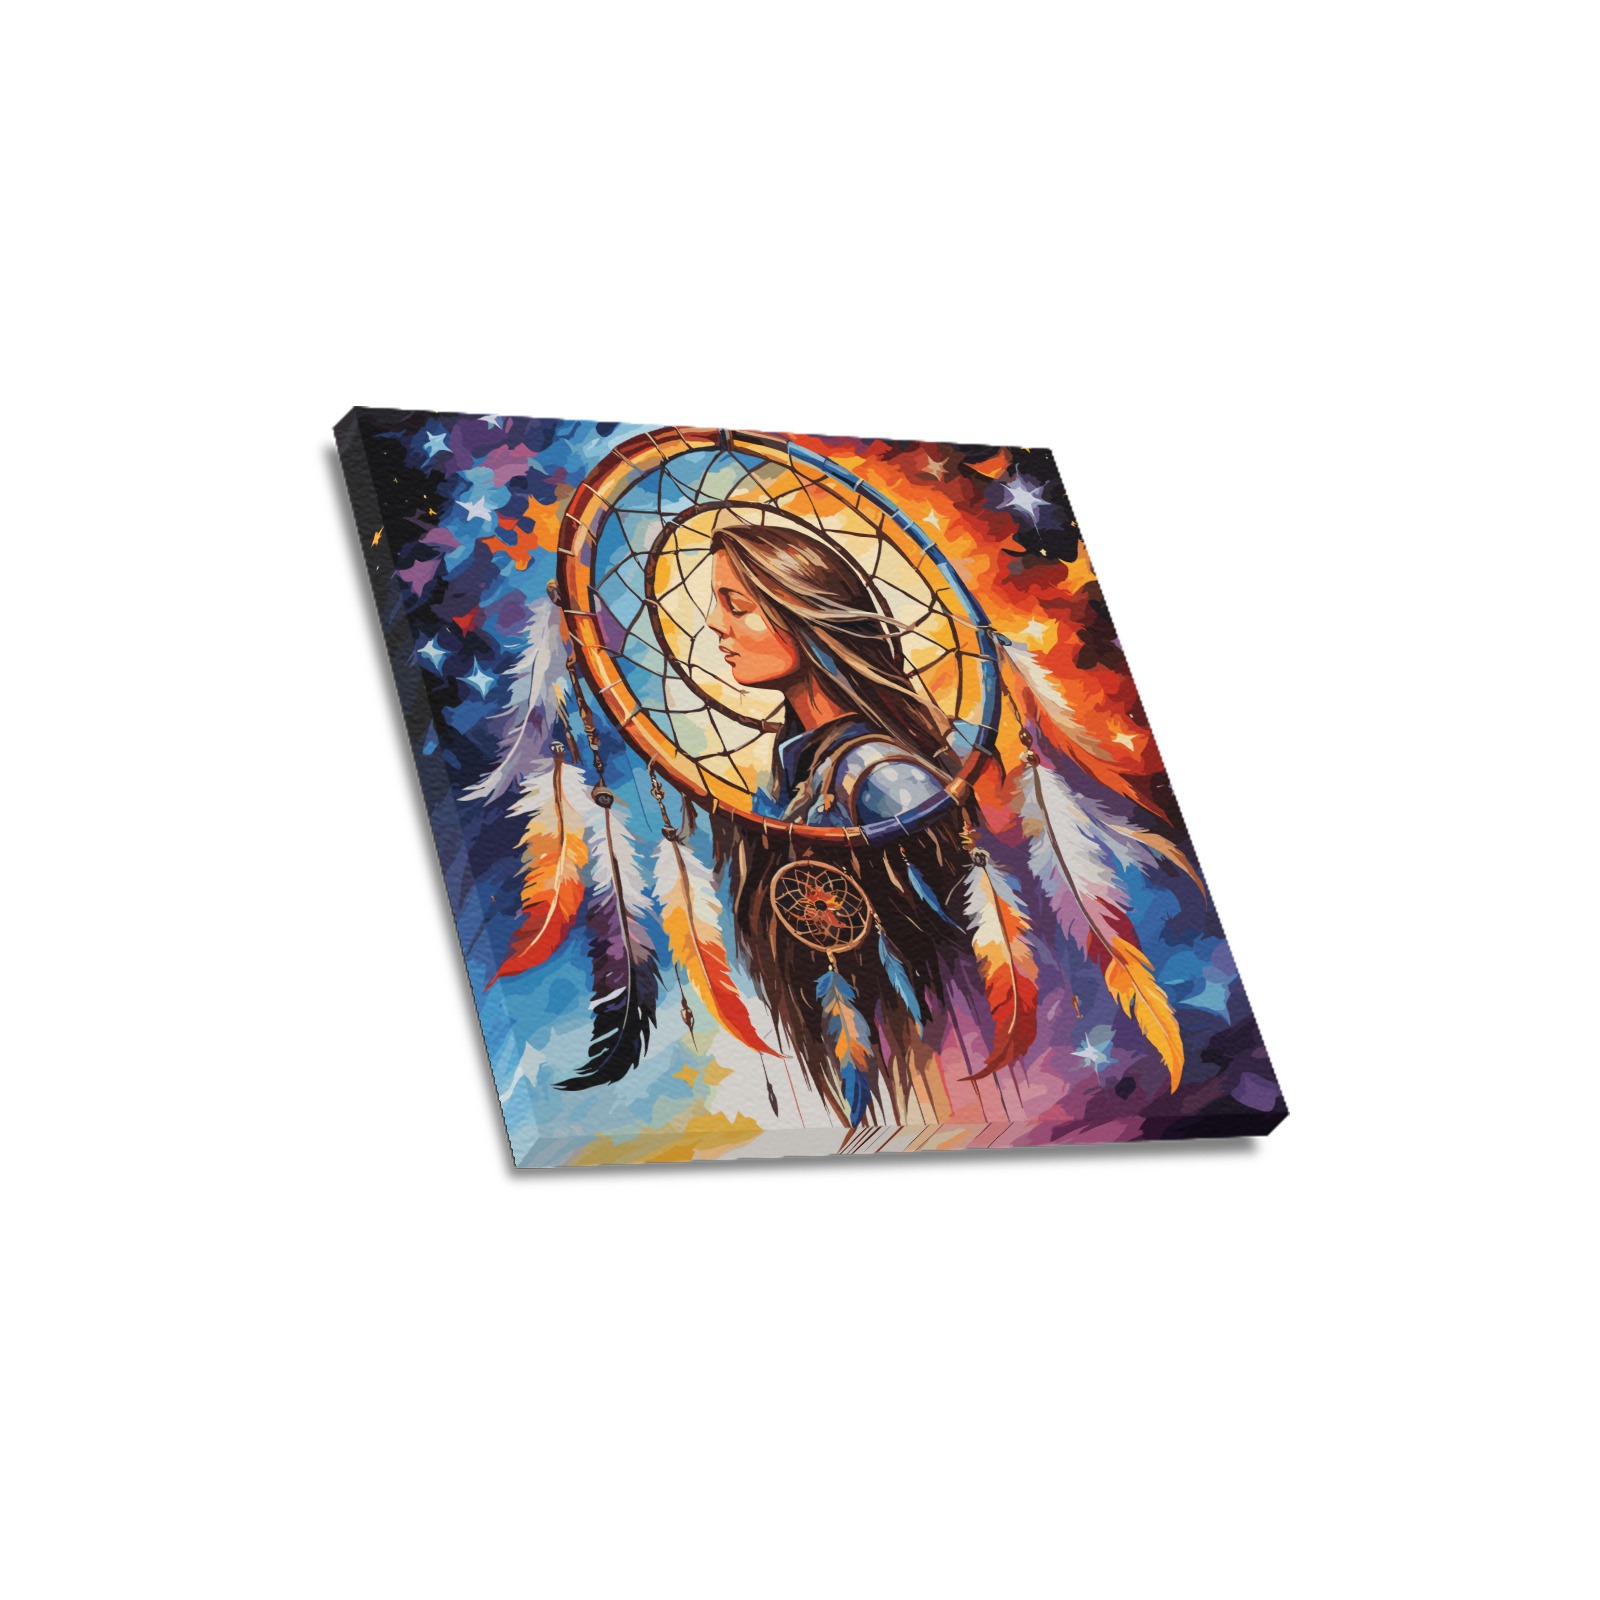 Dreaming woman inside a dreamcatcher colorful art. Upgraded Canvas Print 16"x16"